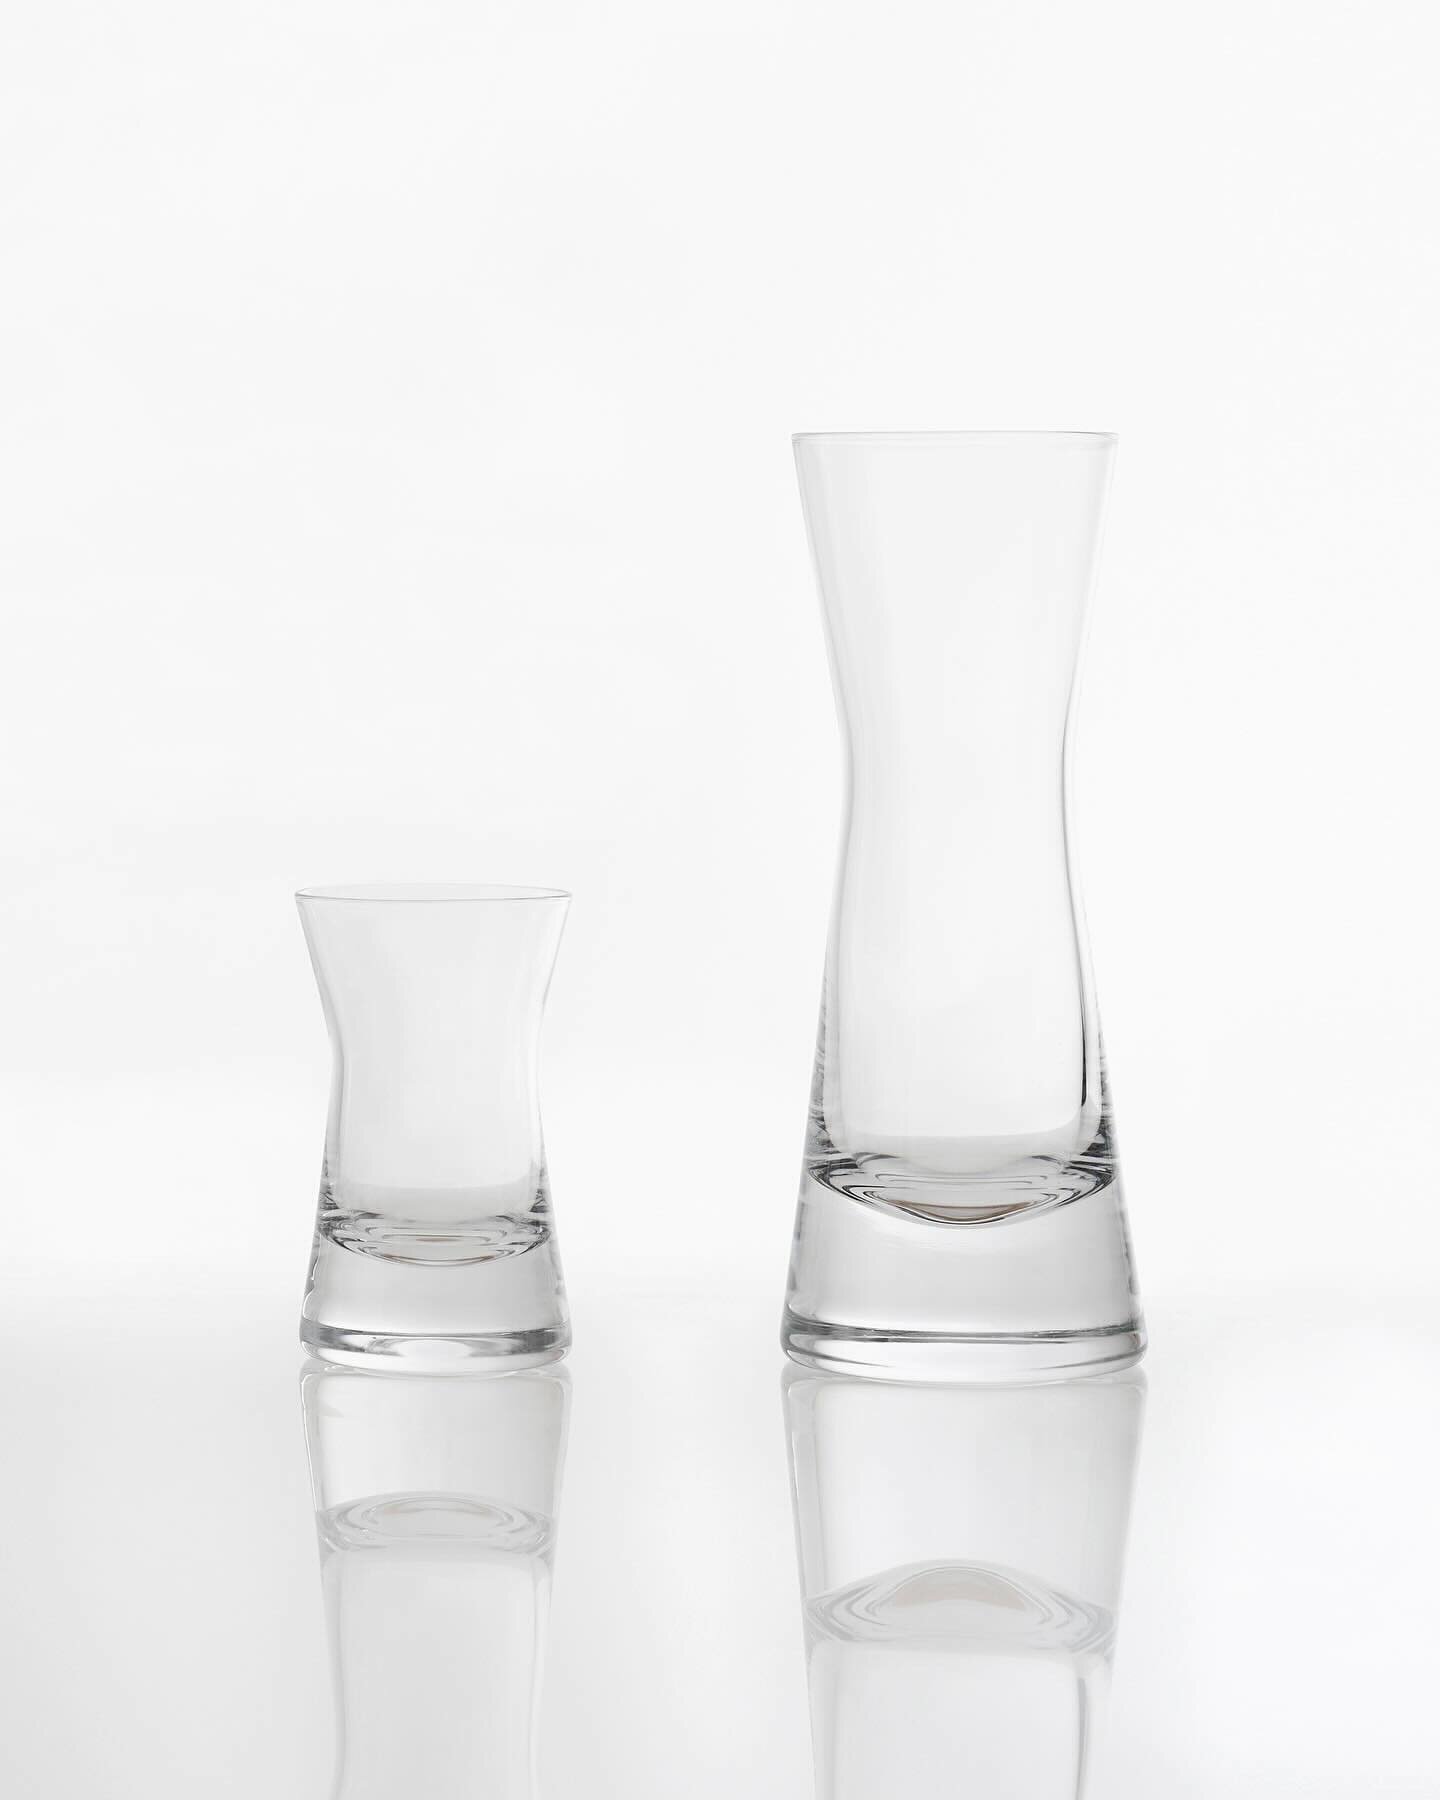 The studio is happy to introduce SENS, a sake set designed for @kimoto_glass_tokyo. 

Inspired by simple geometrical volumes, the set highlights the Japanese tradition of the sake&rsquo;s degustation, by keeping the quality of its taste aromas in the